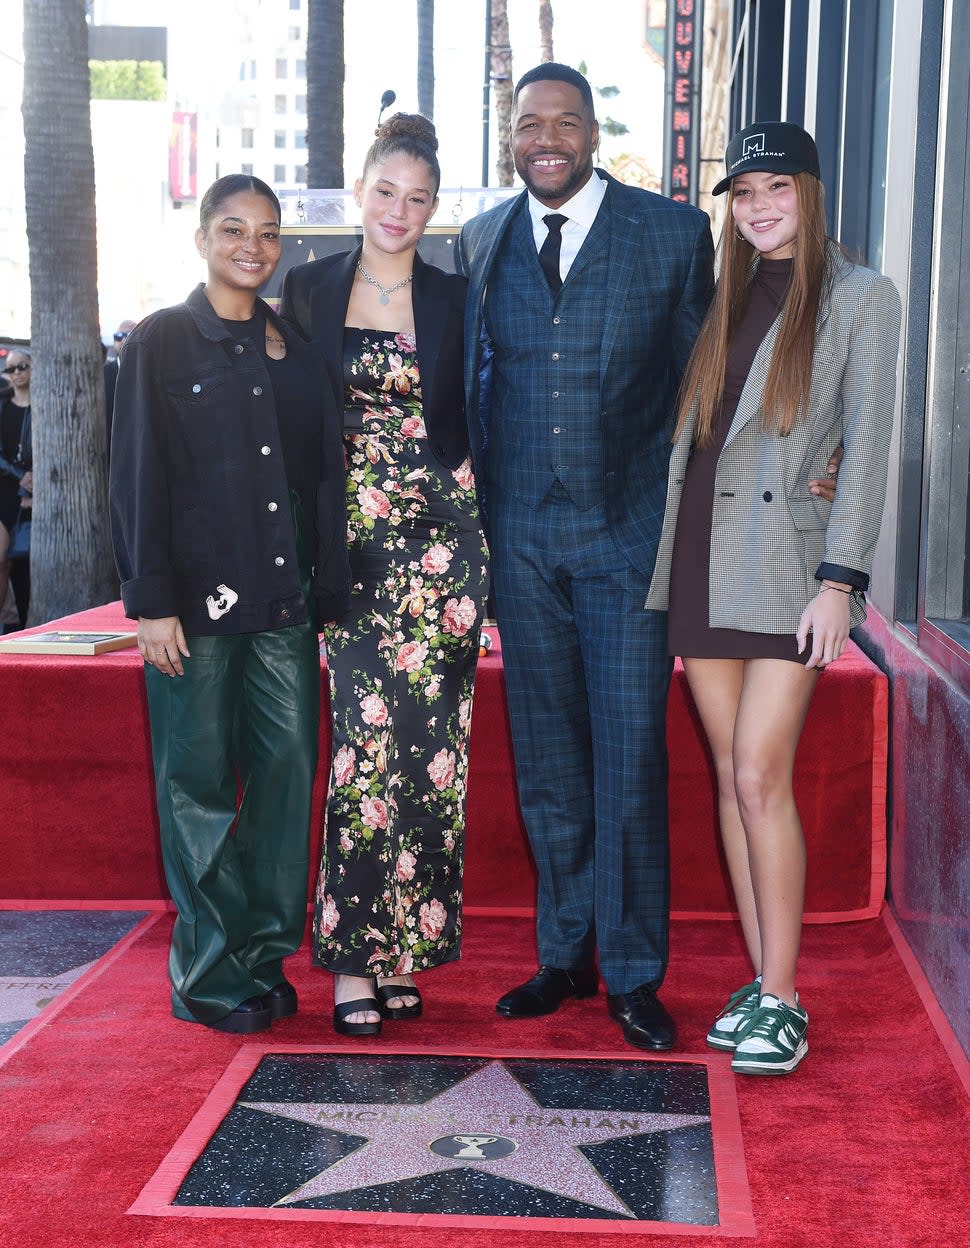 Tanita Strahan, Isabella Strahan, Michael Strahan, Sophia Strahan at the star ceremony where Michael Strahan is honored with the first Sports Entertainment star on the Hollywood Walk of Fame on January 23, 2023 in Los Angeles, California.